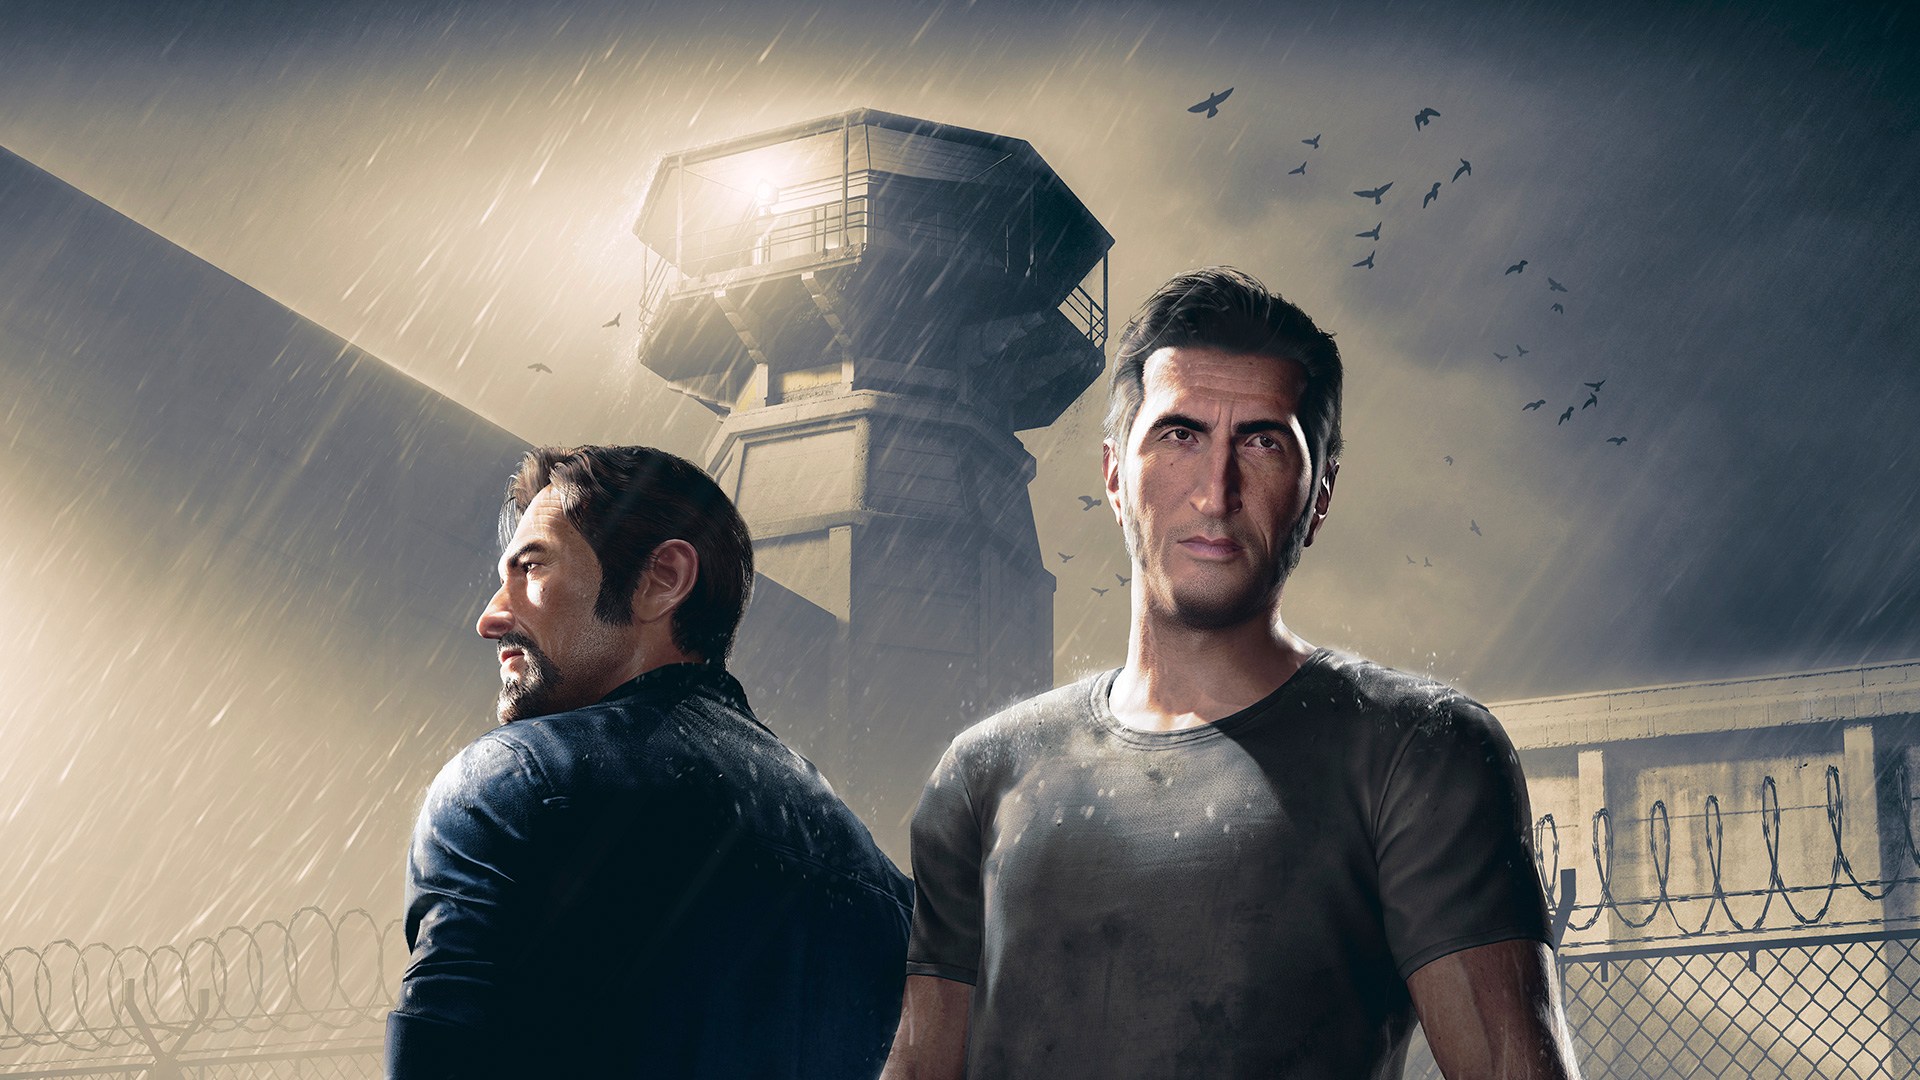 A want to get a way. A way out ps4. Игра для PLAYSTATION 4 A way out. A way out (2018). Игра побег из тюрьмы a way out.